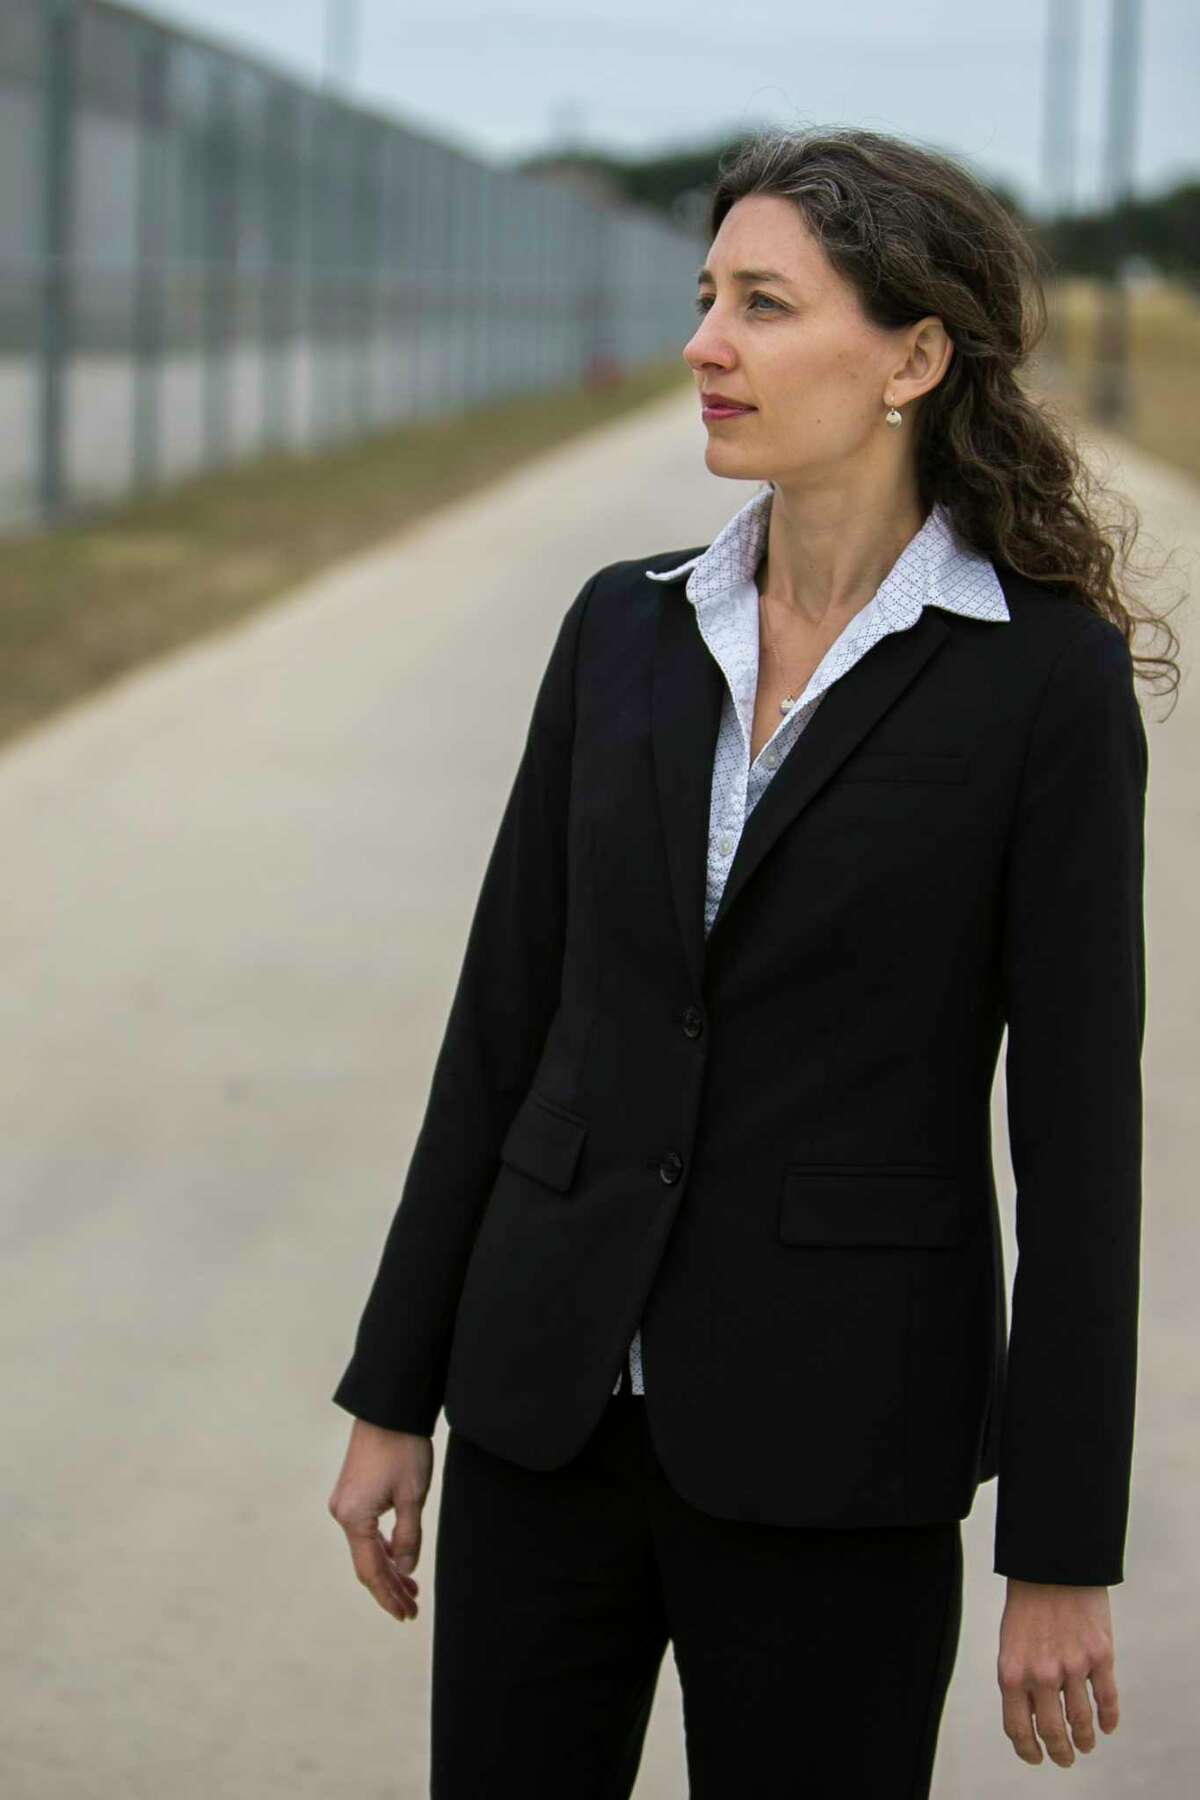 Sara Ramey, executive director of the Migrant Center for Human Rights, poses outside the South Texas Detention Complex, one of the largest detention centers in the country, where she represents clients Dec. 5, 2018. "Here in the U.S. we have a strong constitution and without education and services... people really don't have any way of effectively presenting immigration cases to judges," says Ramey of the importance of her work. People often don't realize how difficult it is for people to go through the legal process and when individuals have a lawyer their chances are increased by four times explains Ramey. "People need to have their right to due process," says Ramey.